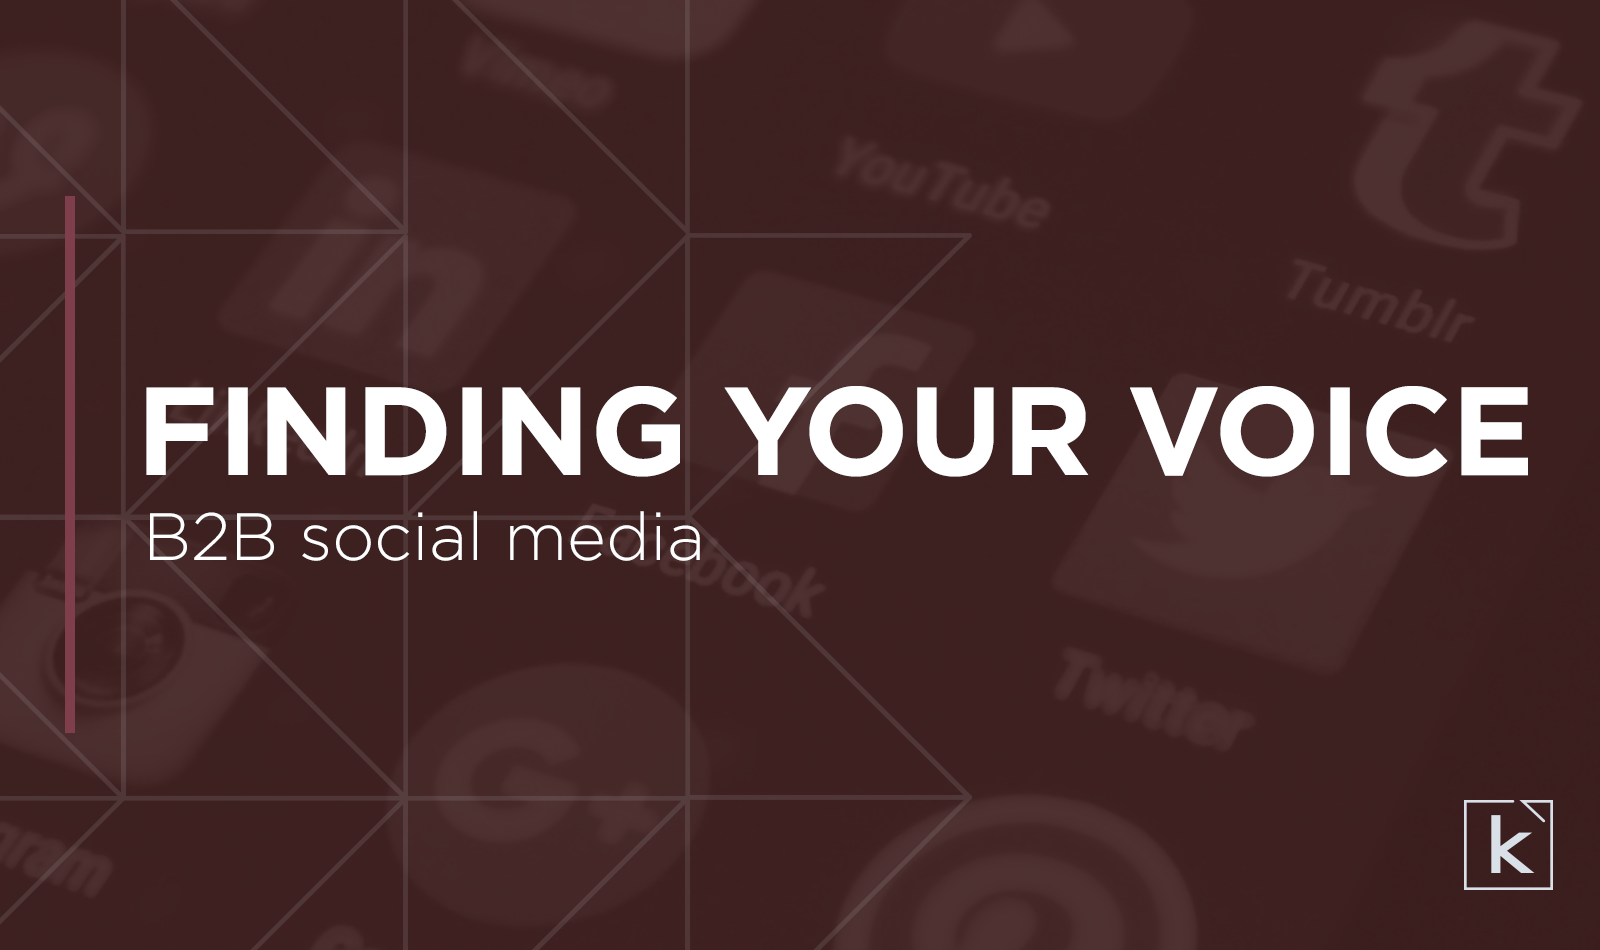 B2B-social-media-finding-your-voice